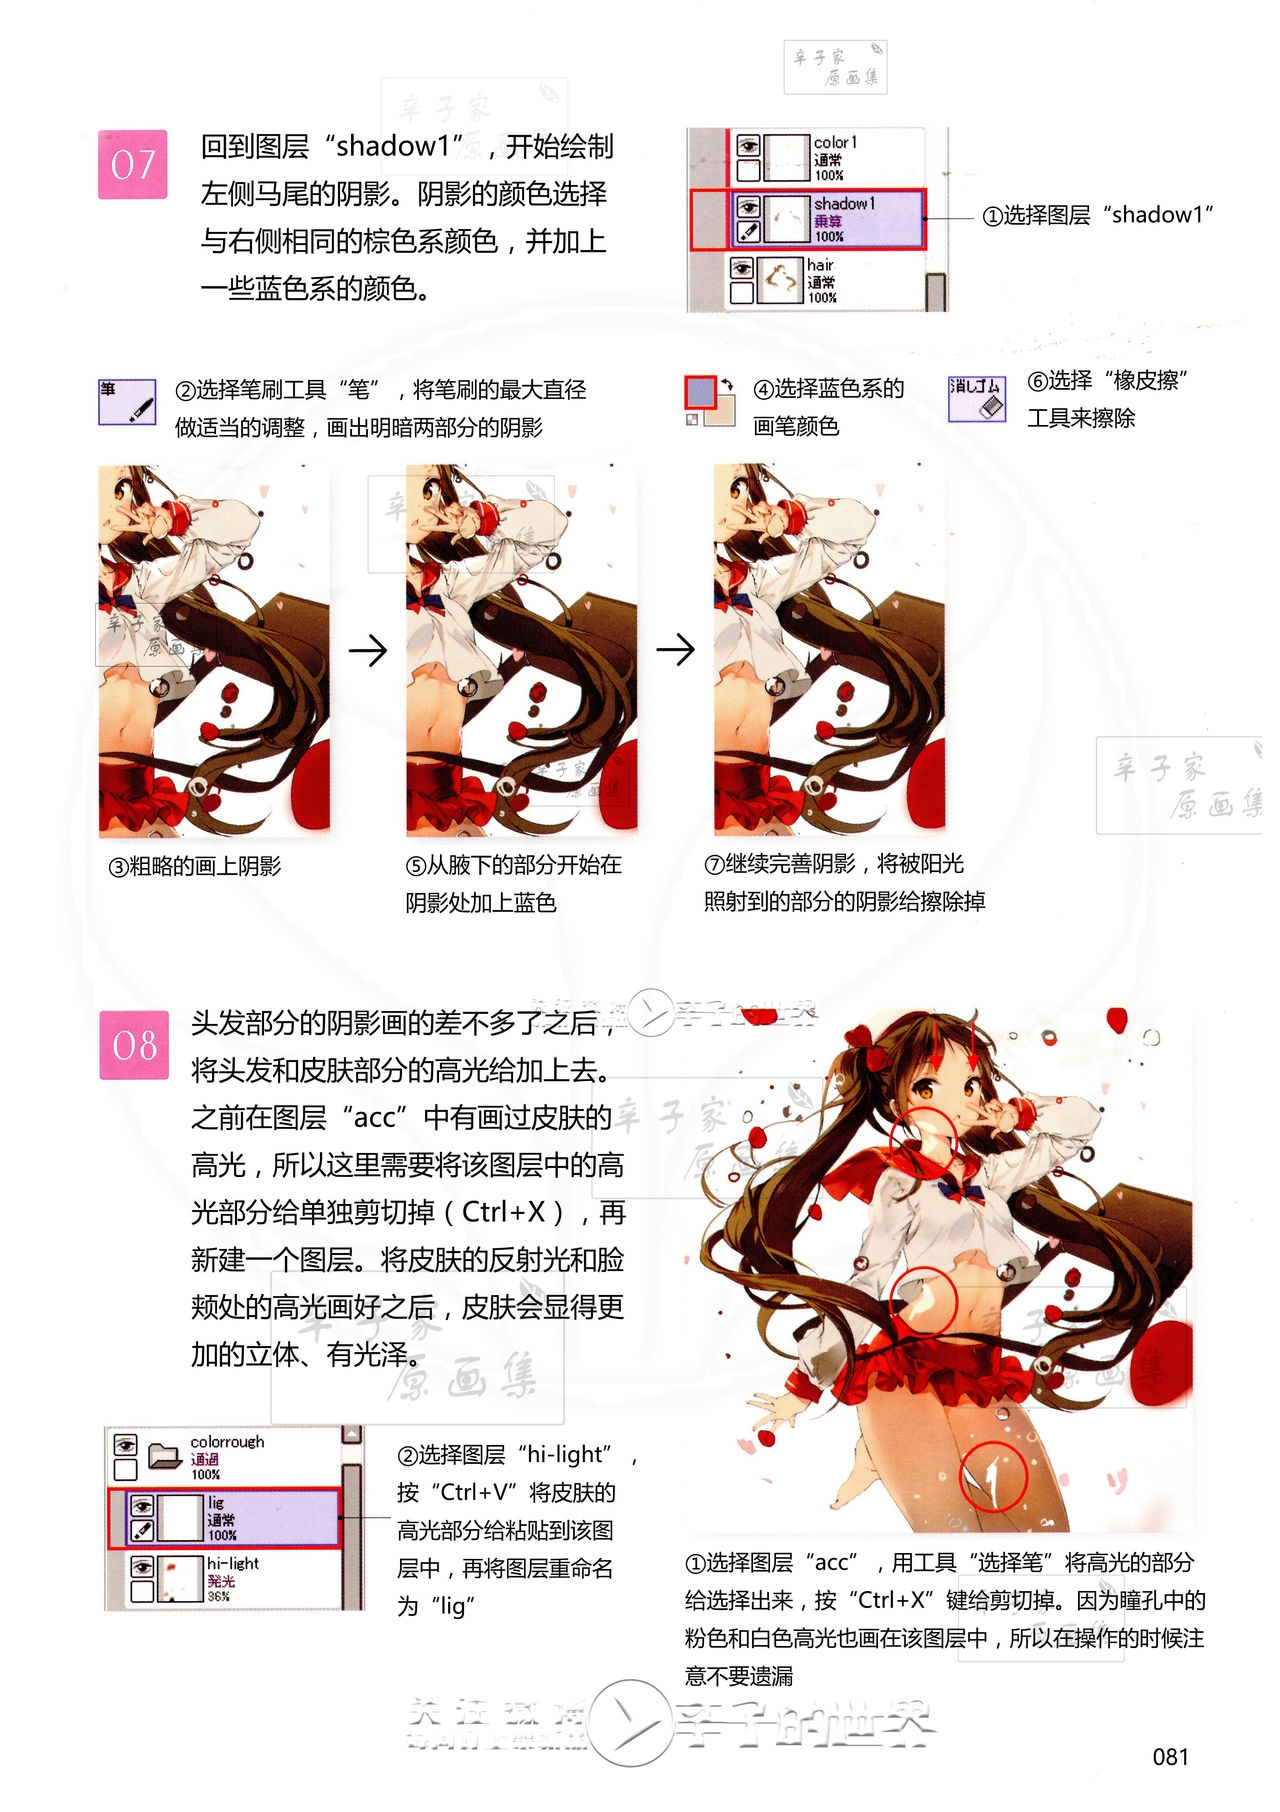 [Anmi] Lets Make ★ Character CG illustration techniques vol.9 [Chinese] 79